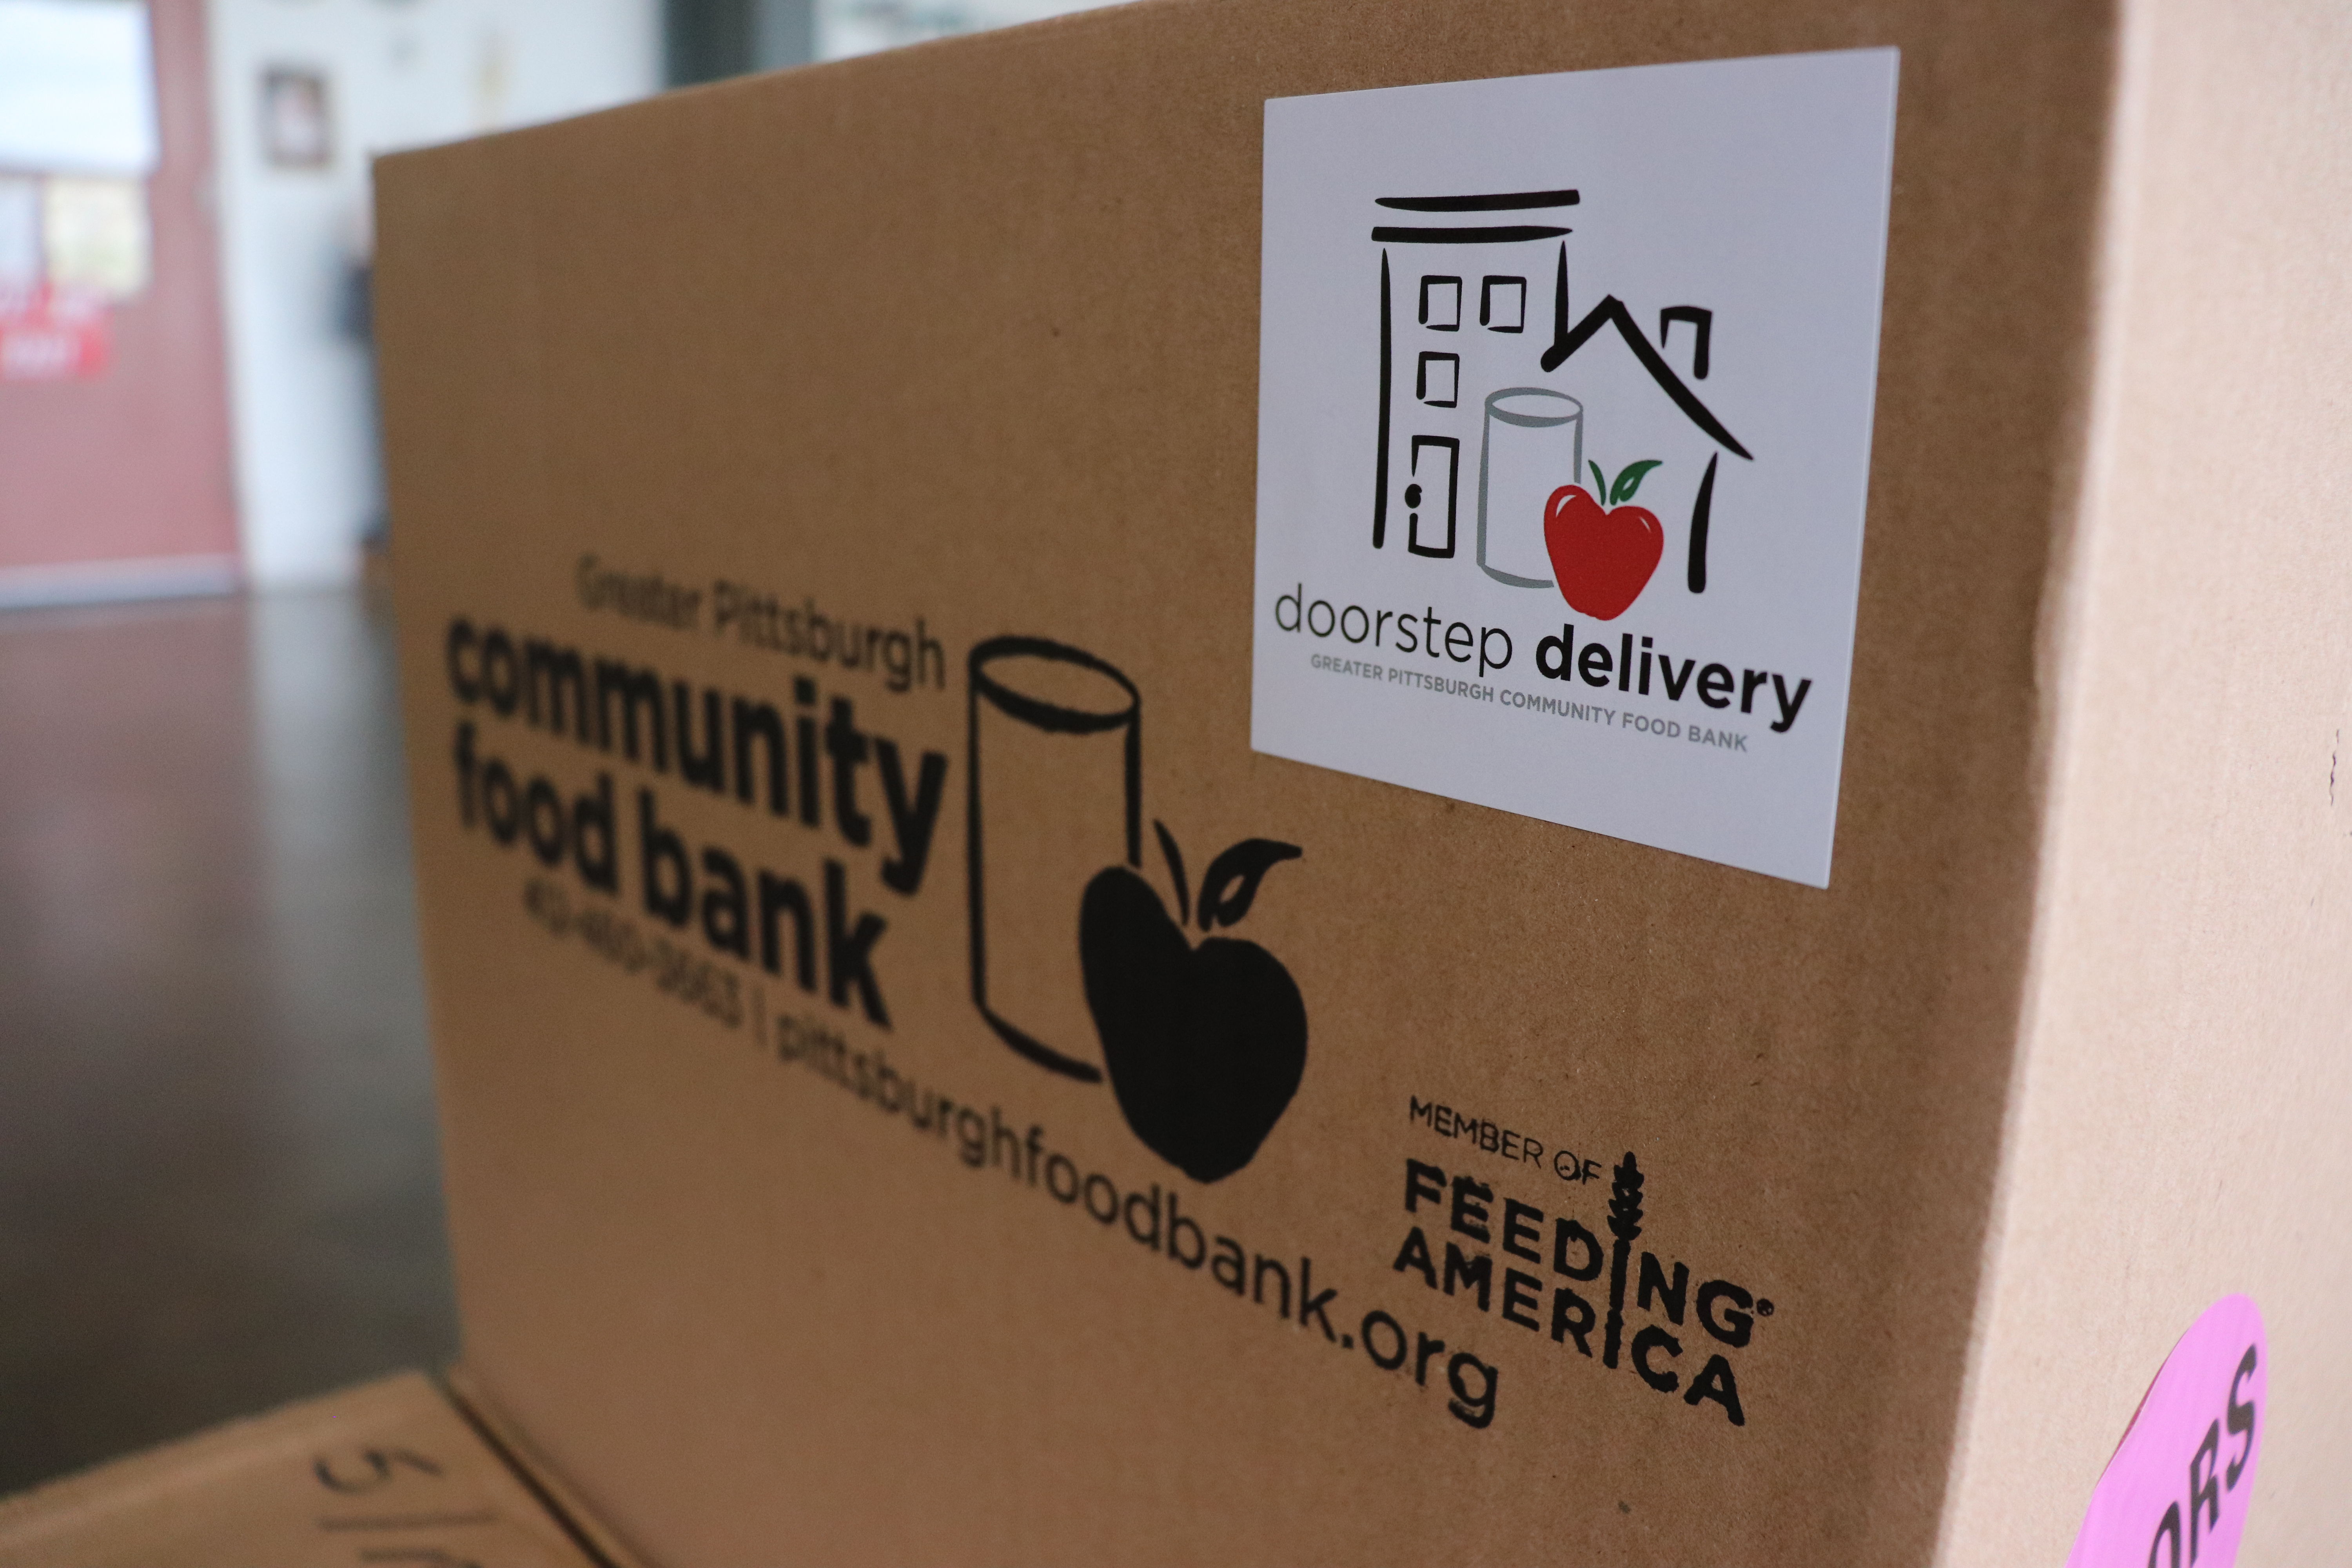 Every employee donated several boxes of food, like the one pictured above, to homes around Allegheny County.